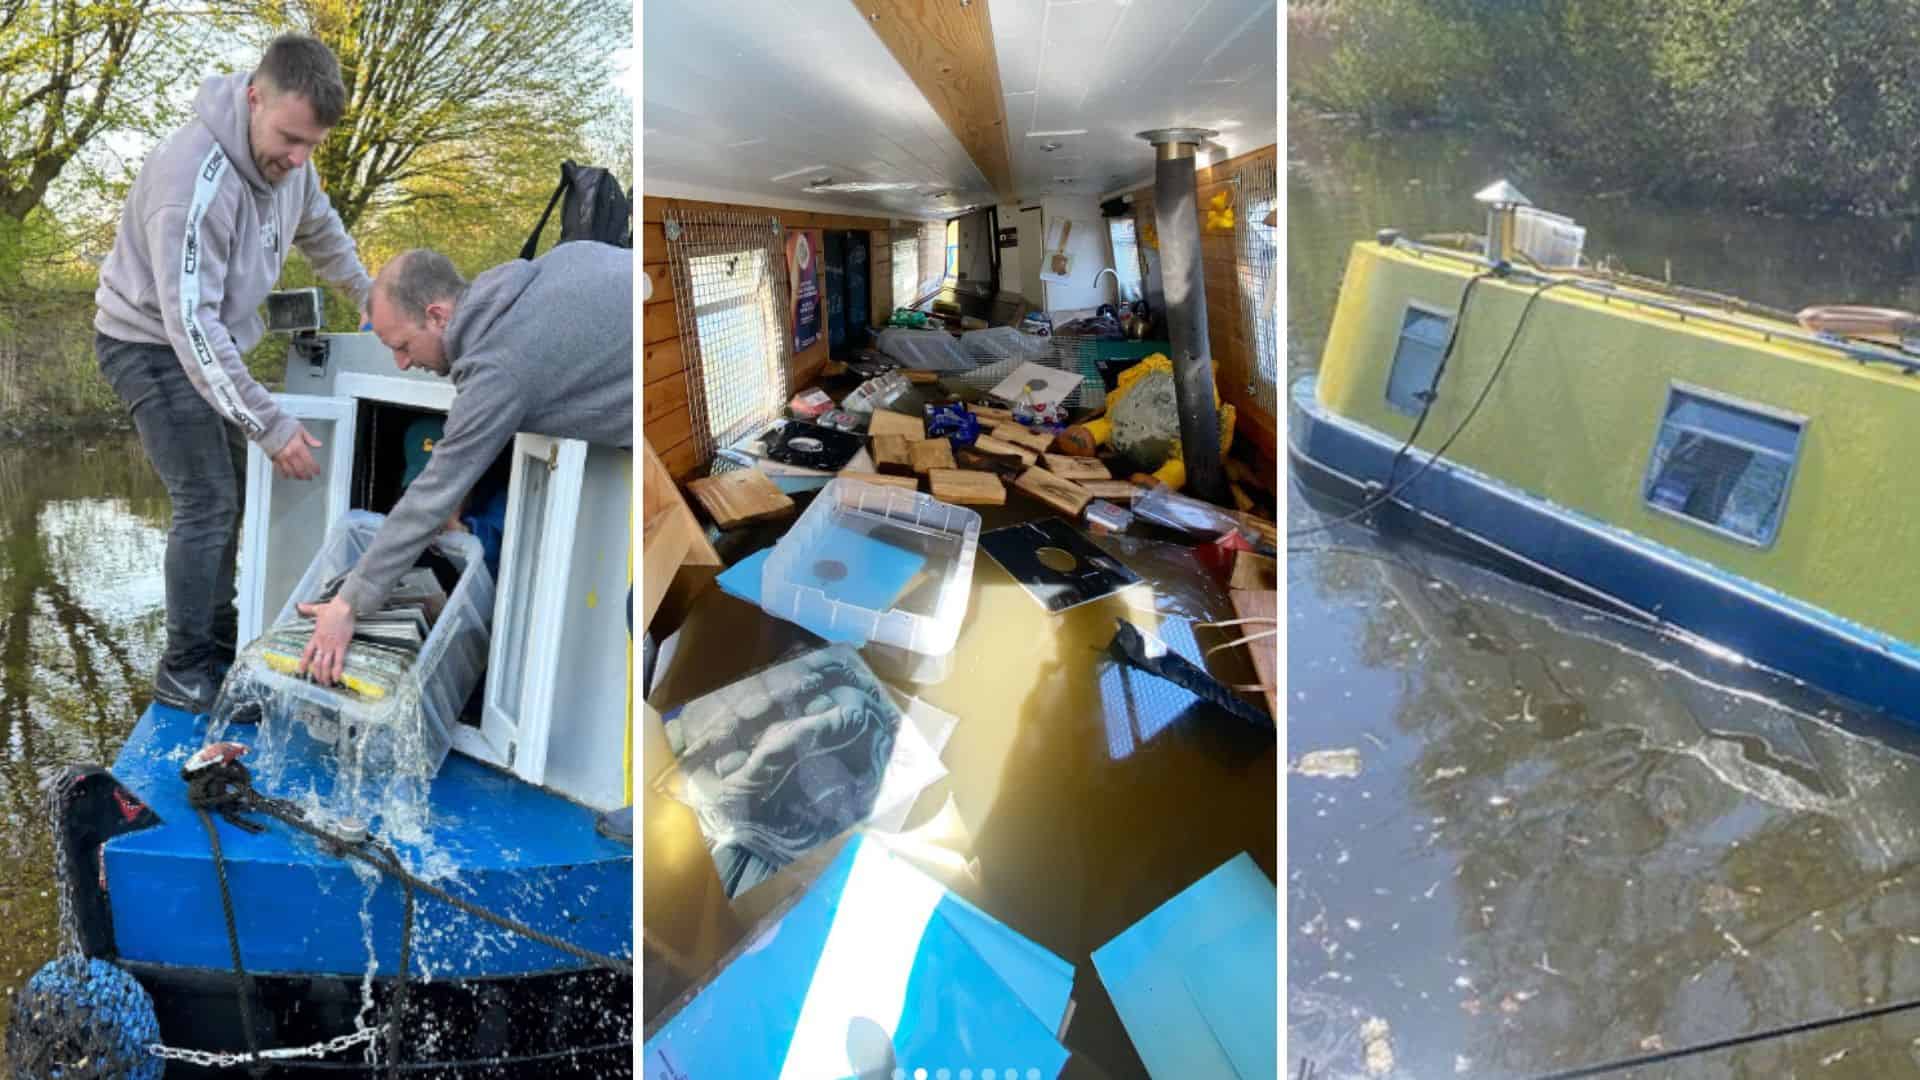 Rubber Ducky Records, a floating store on the Rochdale Canal has sunk